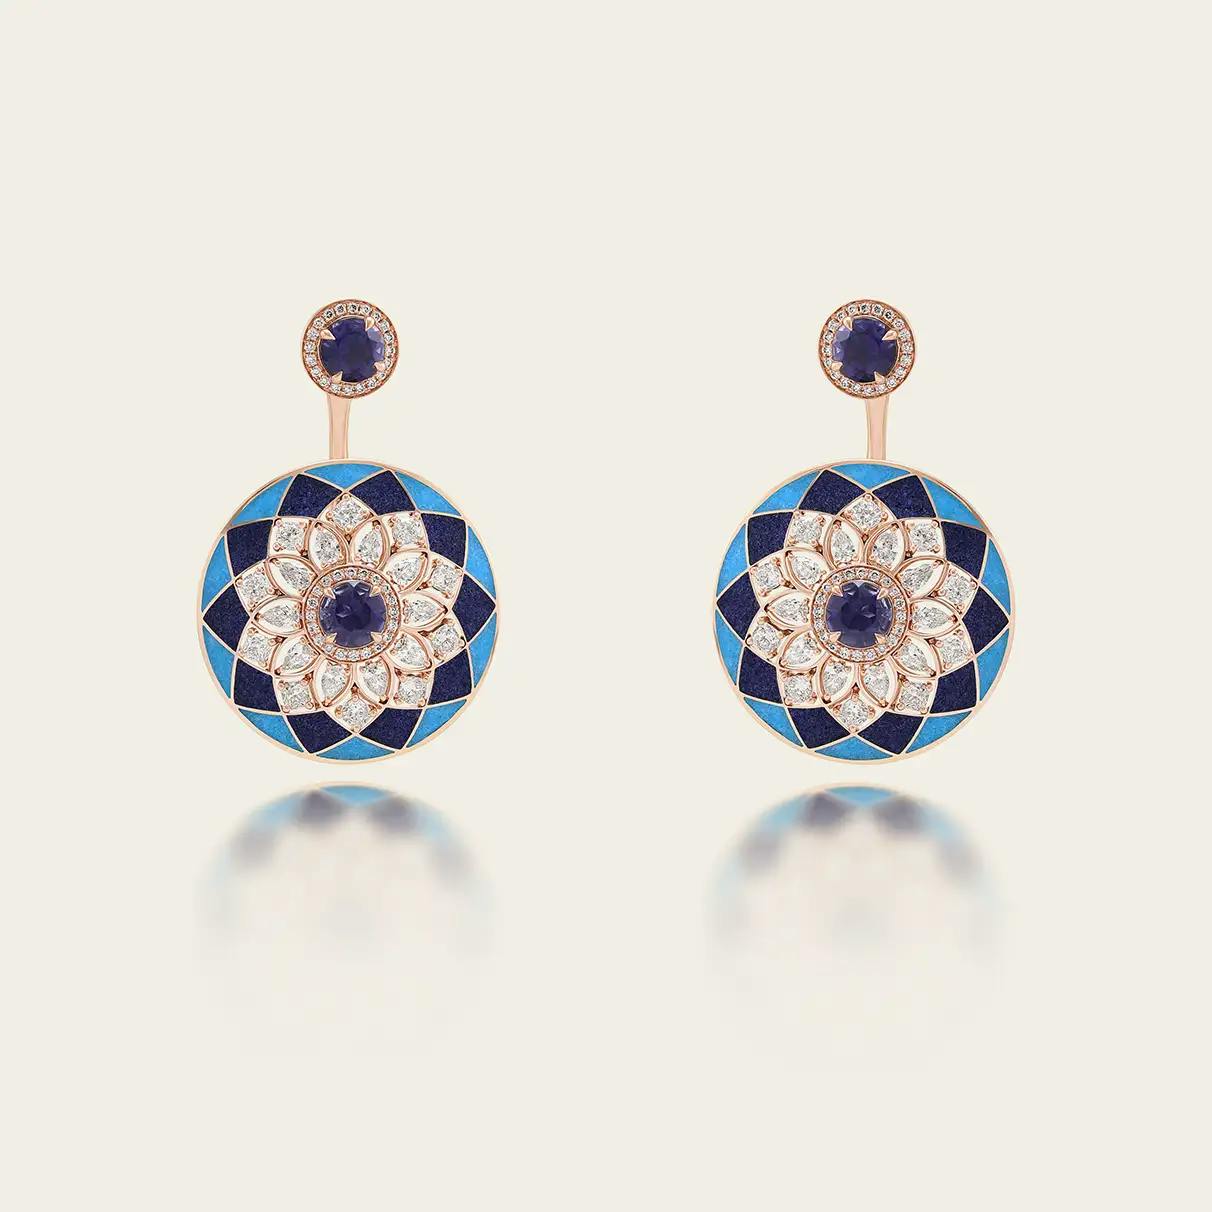 18K recycled rose-gold earrings with lapis and turquoise inlay, pear and cushion-cut diamonds, and iolites.